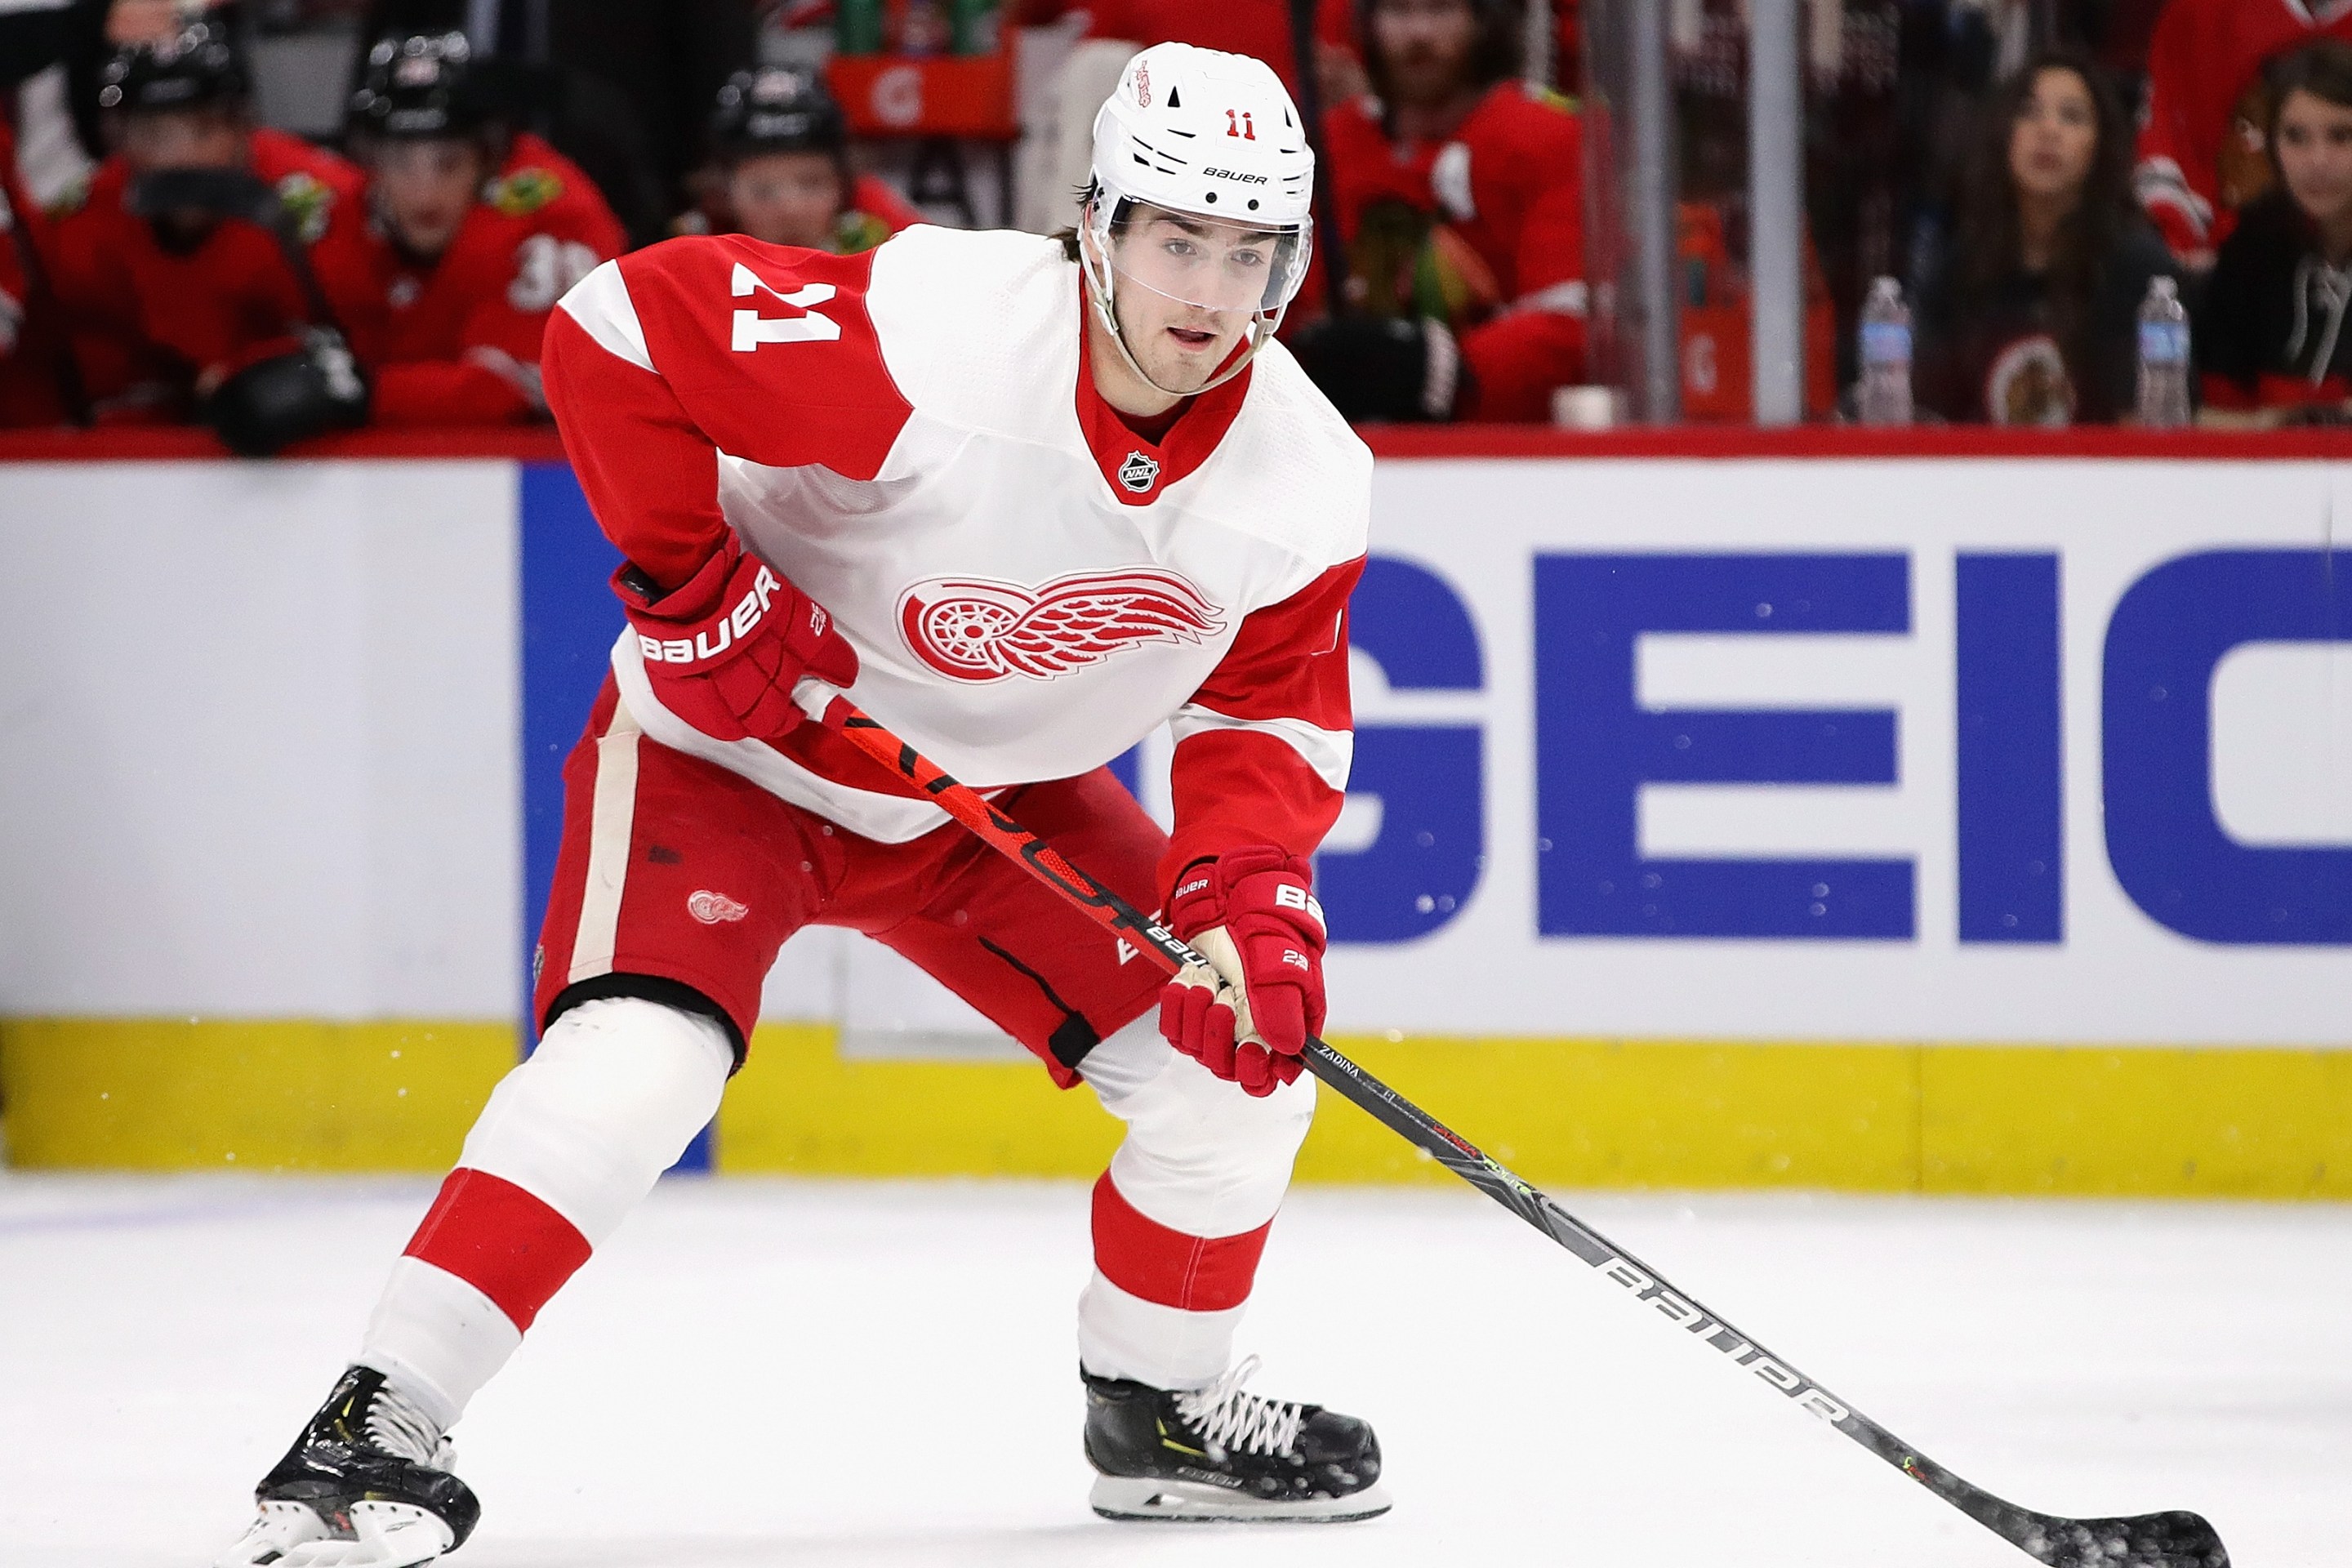 Filip Zadina #11 of the Detroit Red Wings controls the puck